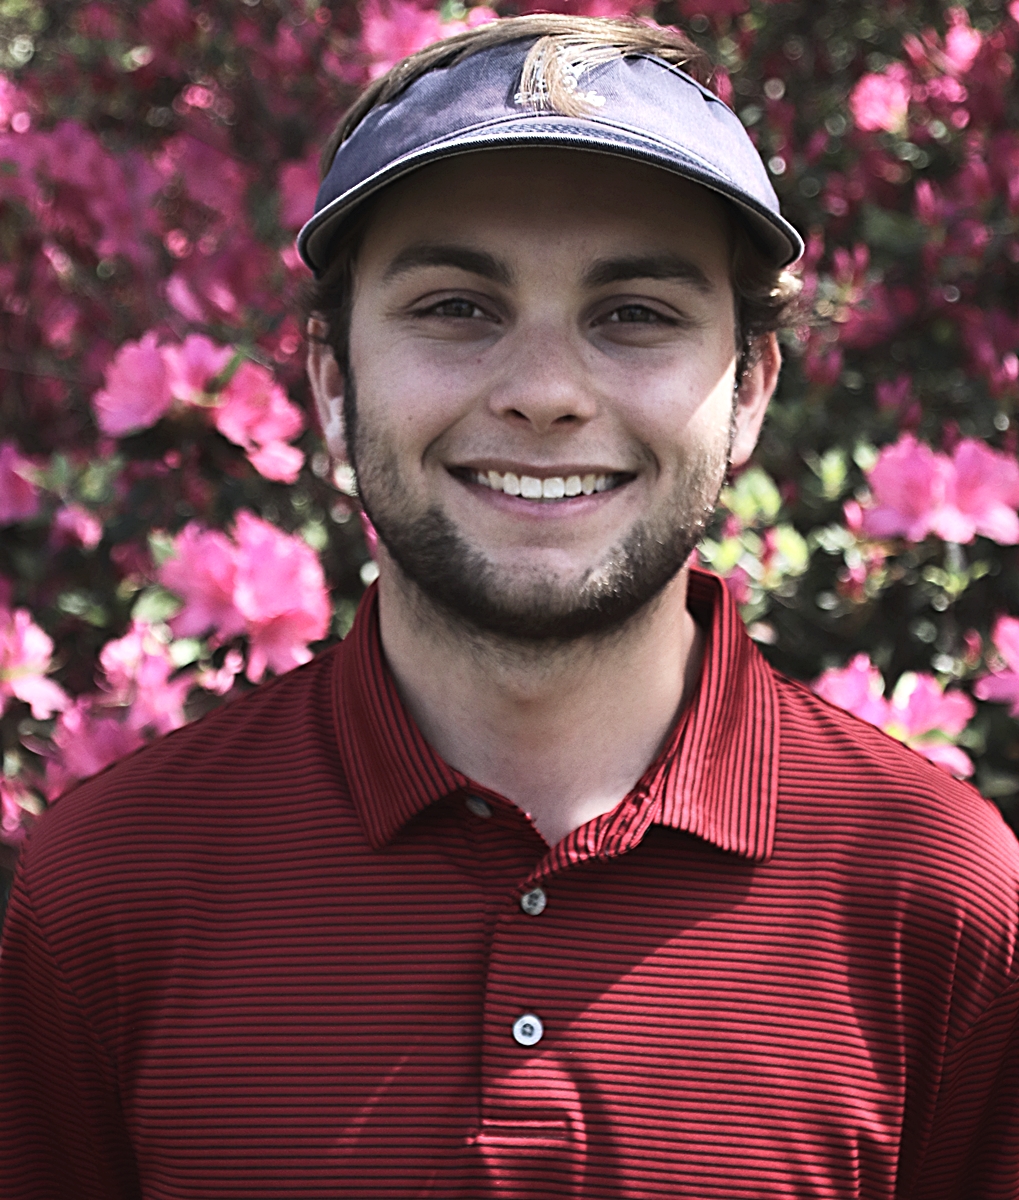 Dunwoody's Jack Kerdasha was the low medalist with a 78.